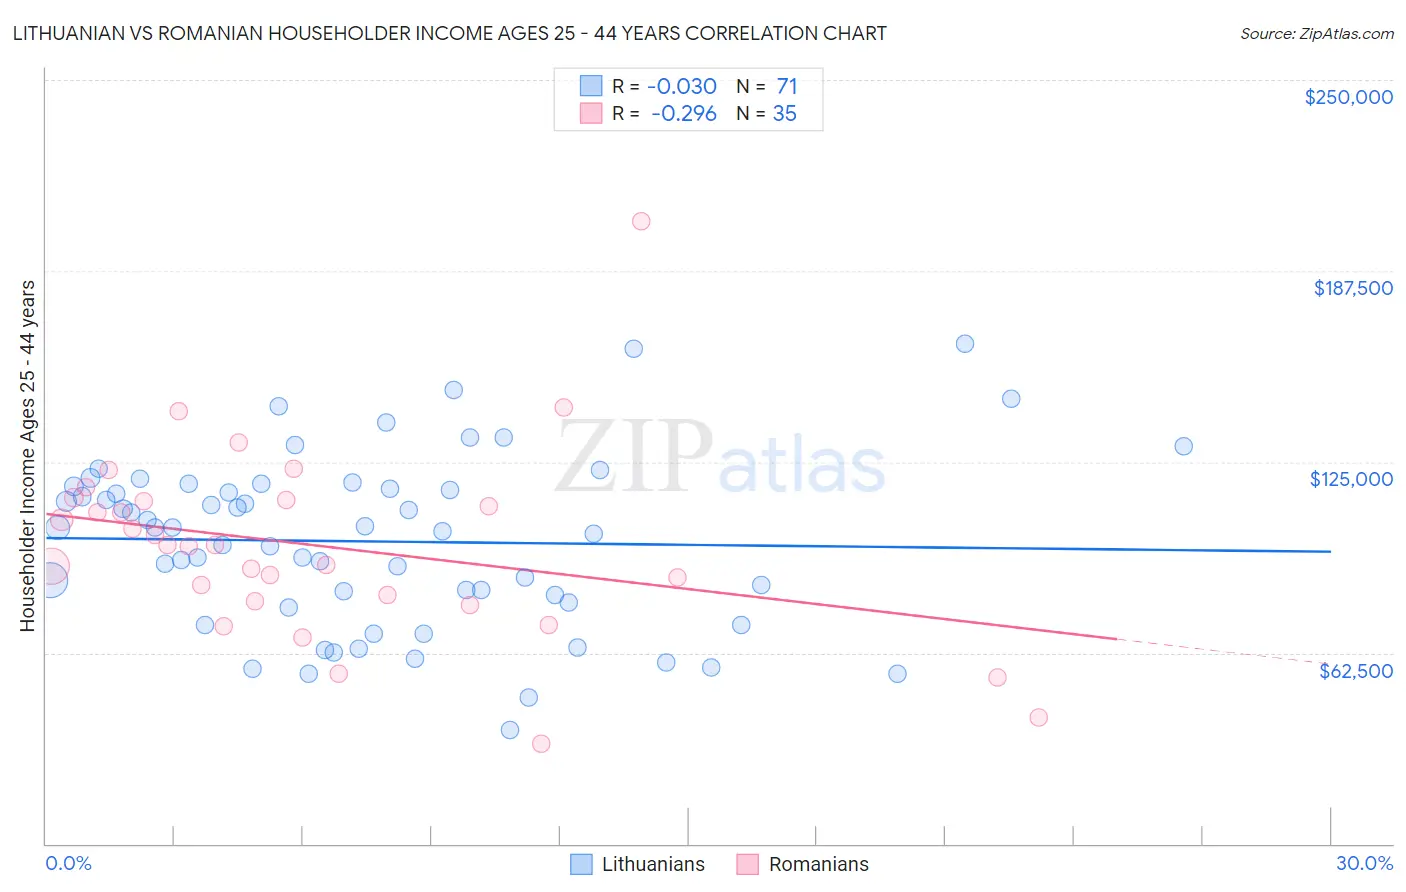 Lithuanian vs Romanian Householder Income Ages 25 - 44 years